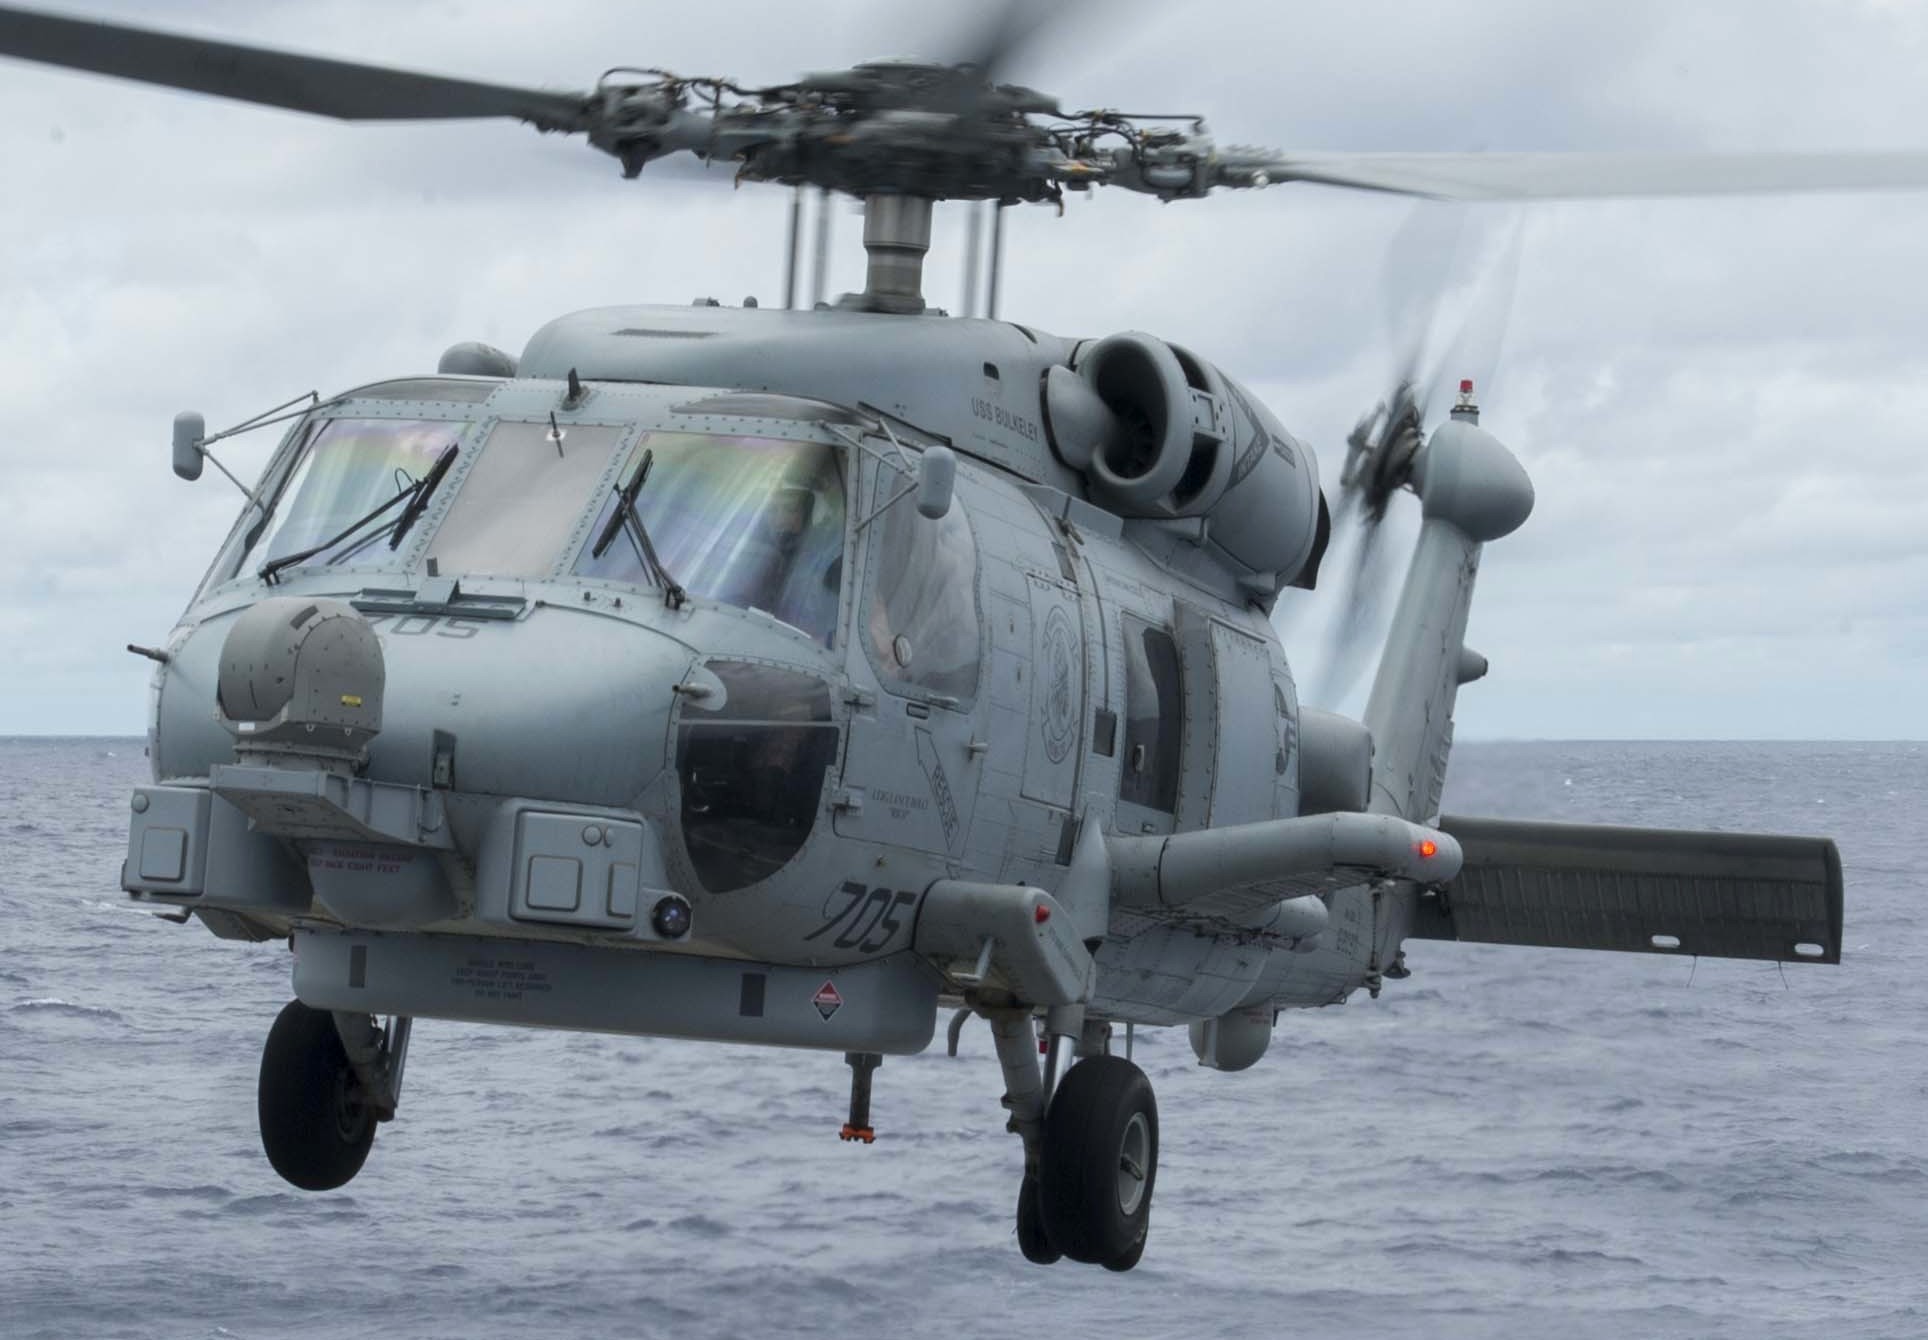 hsm-72 proud warriors helicopter maritime strike squadron mh-60r seahawk carrier air wing cvw-7 uss bulkeley ddg-84 17